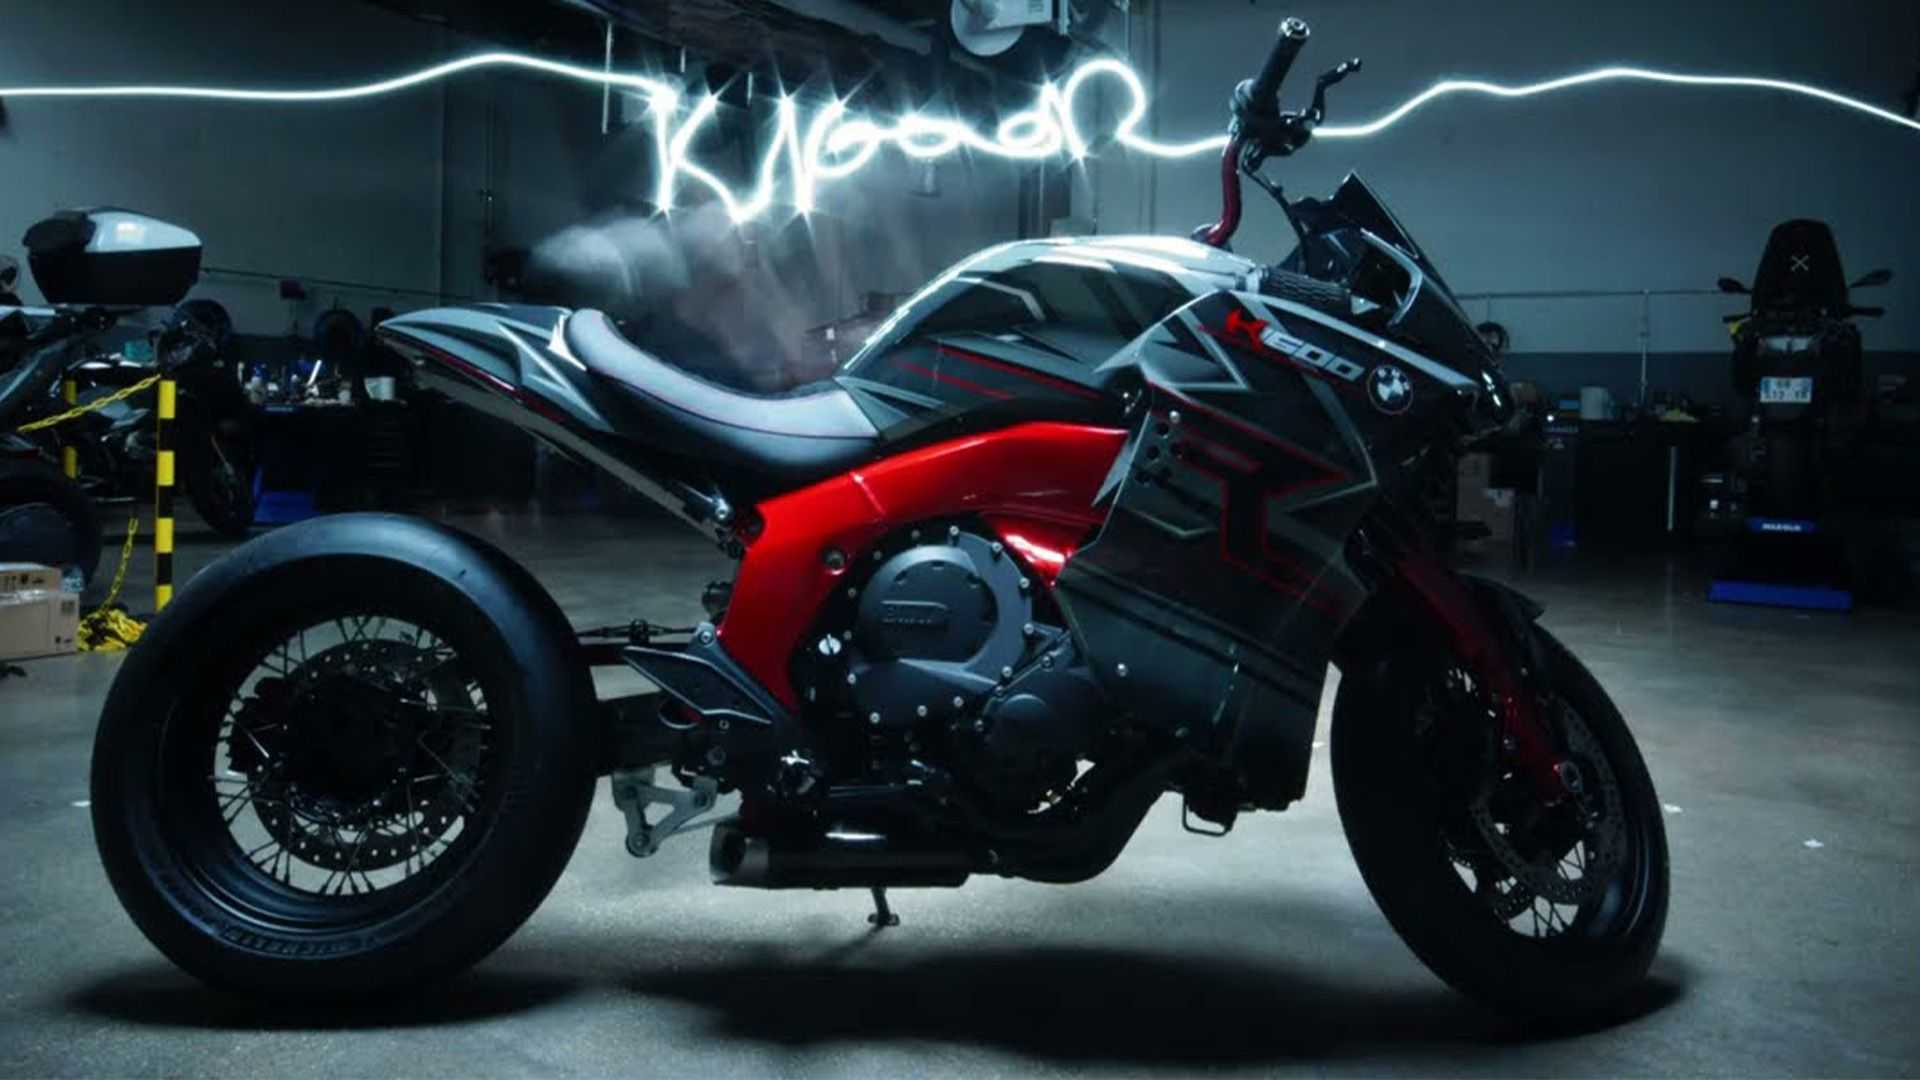 The revised K 1600 roadster from the minds of Motorrad BymyCar. Media sourced from RideApart.